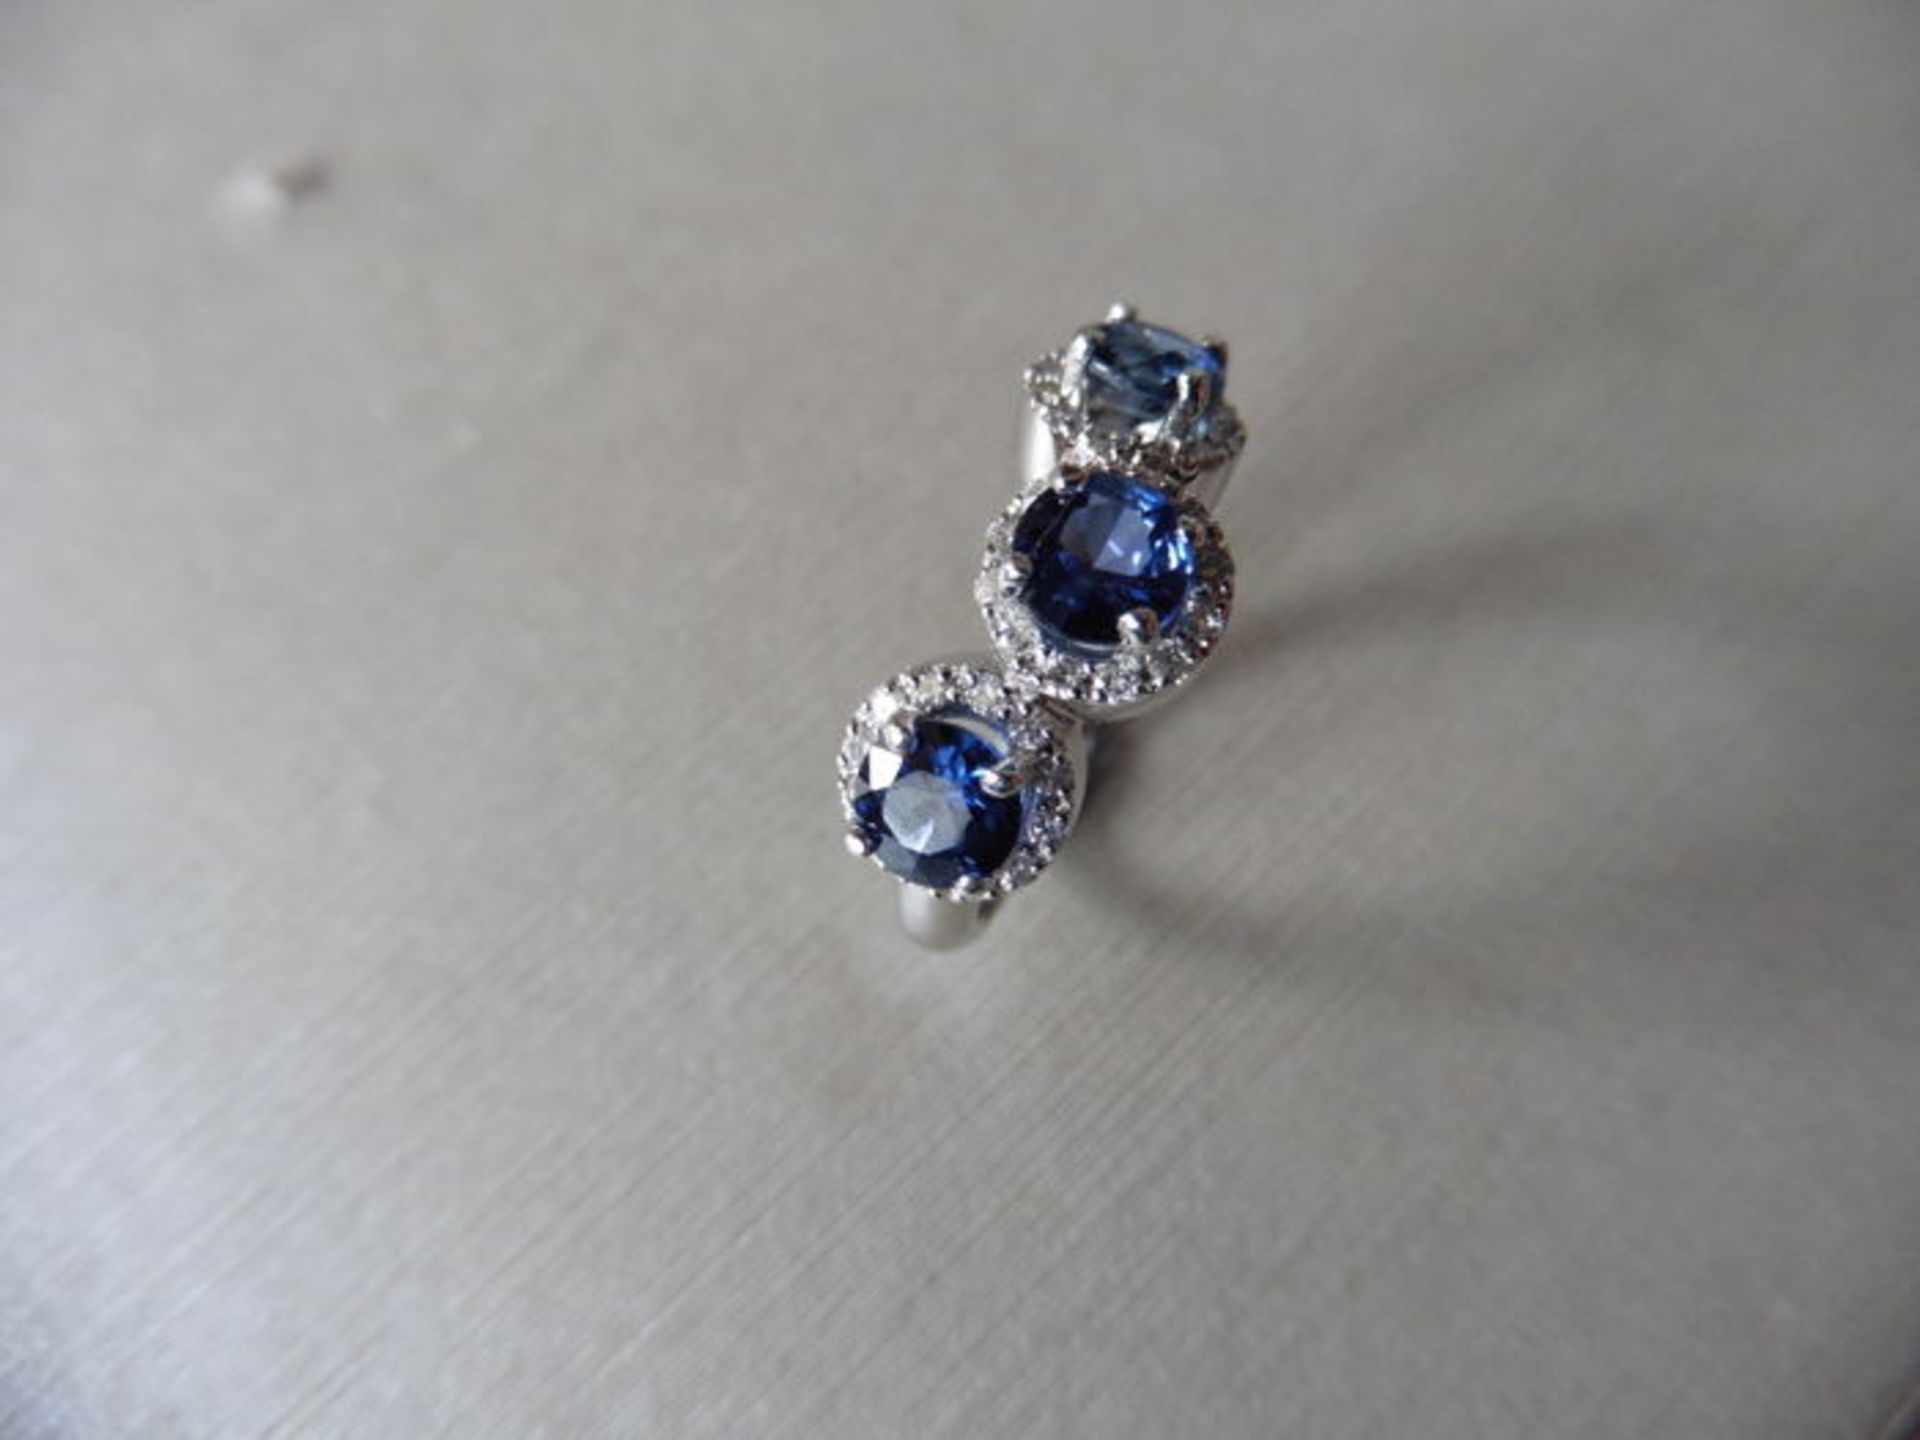 18ct white gold trilogy ring set with 3 round cut sapphires weighing 0.70ct. These are surrounded in - Bild 3 aus 3